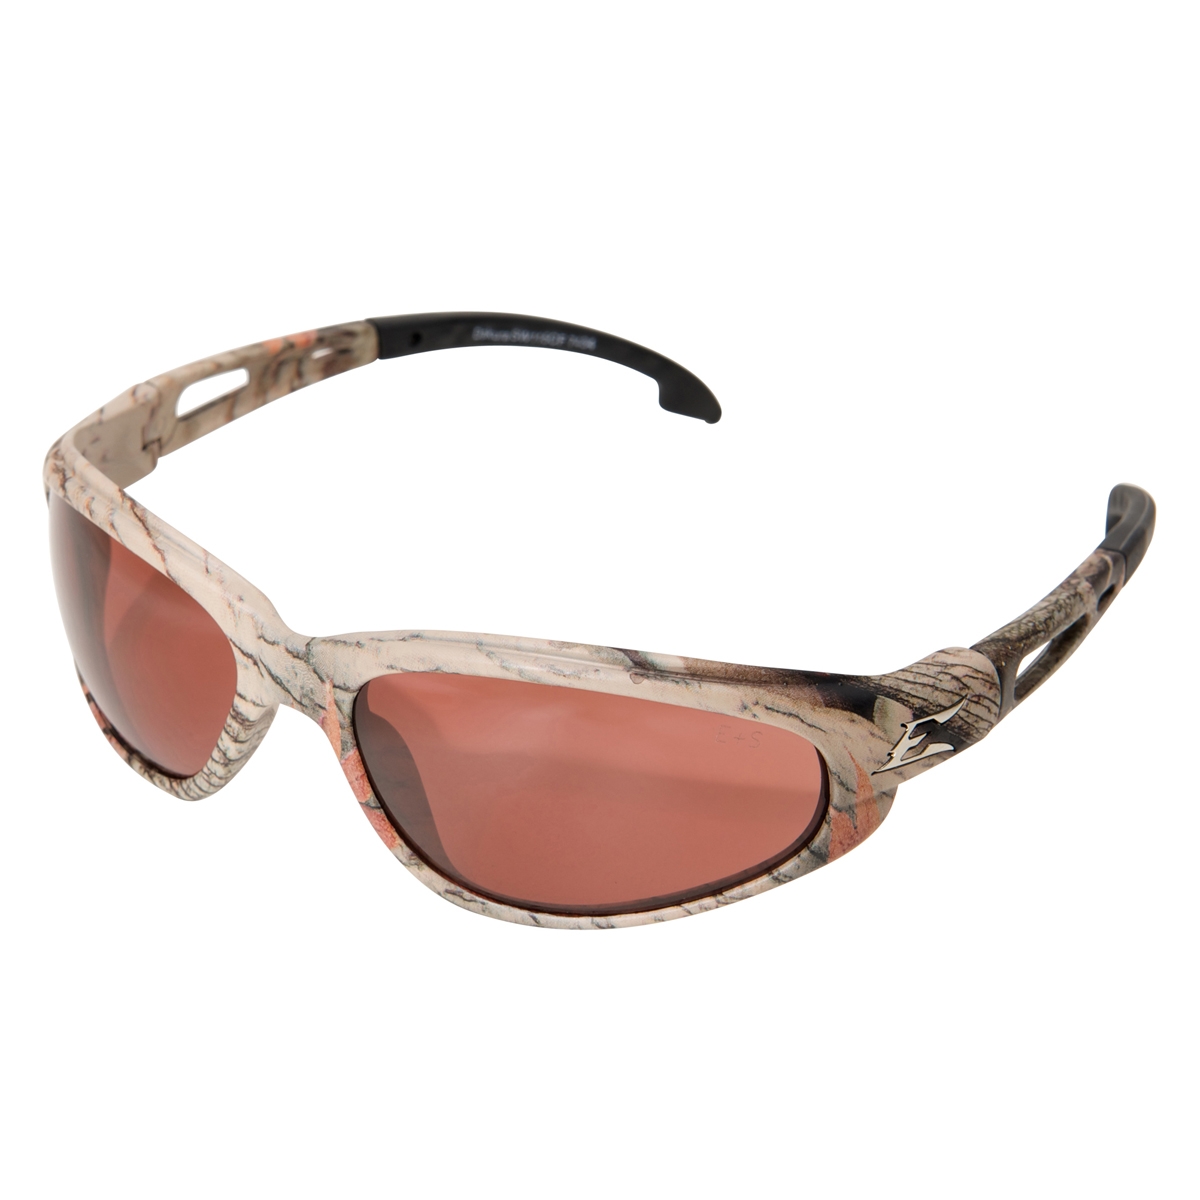 Black with Copper "Driving" Lens Edge Eyewear SR115 Reclus Safety Glasses 